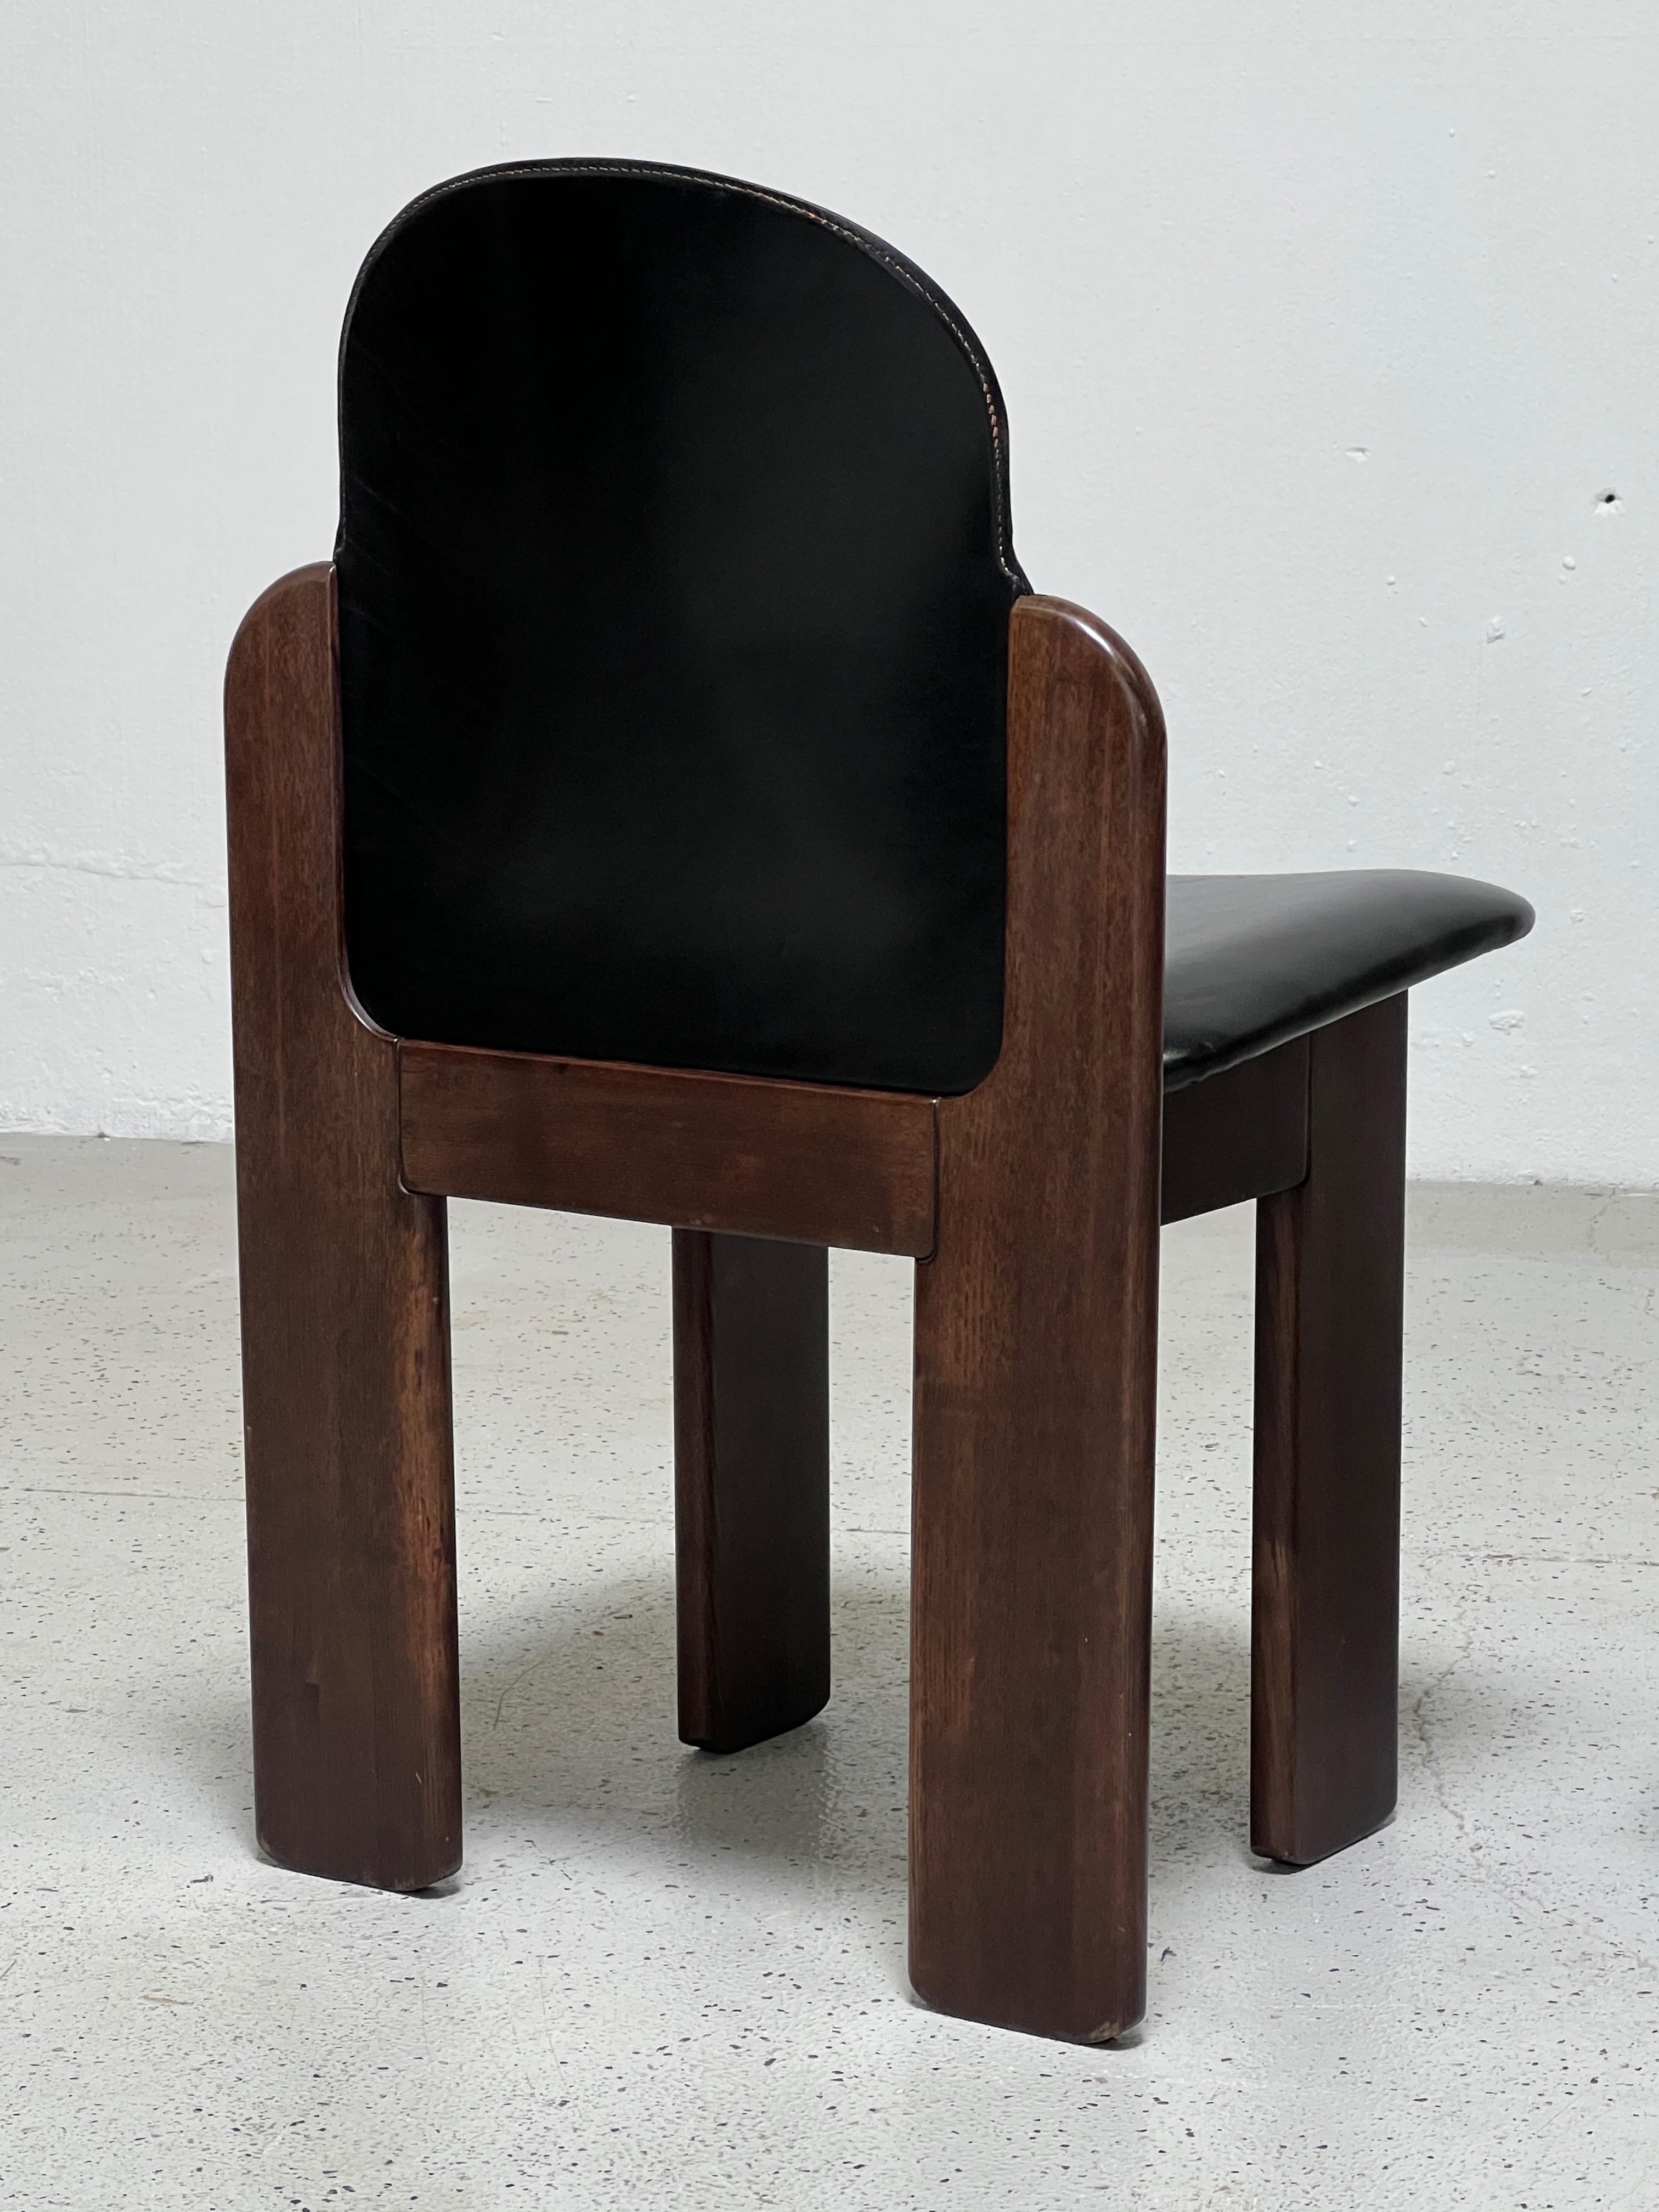 Four Leather and Walnut Chairs by Silvio Coppola for Bernini 1